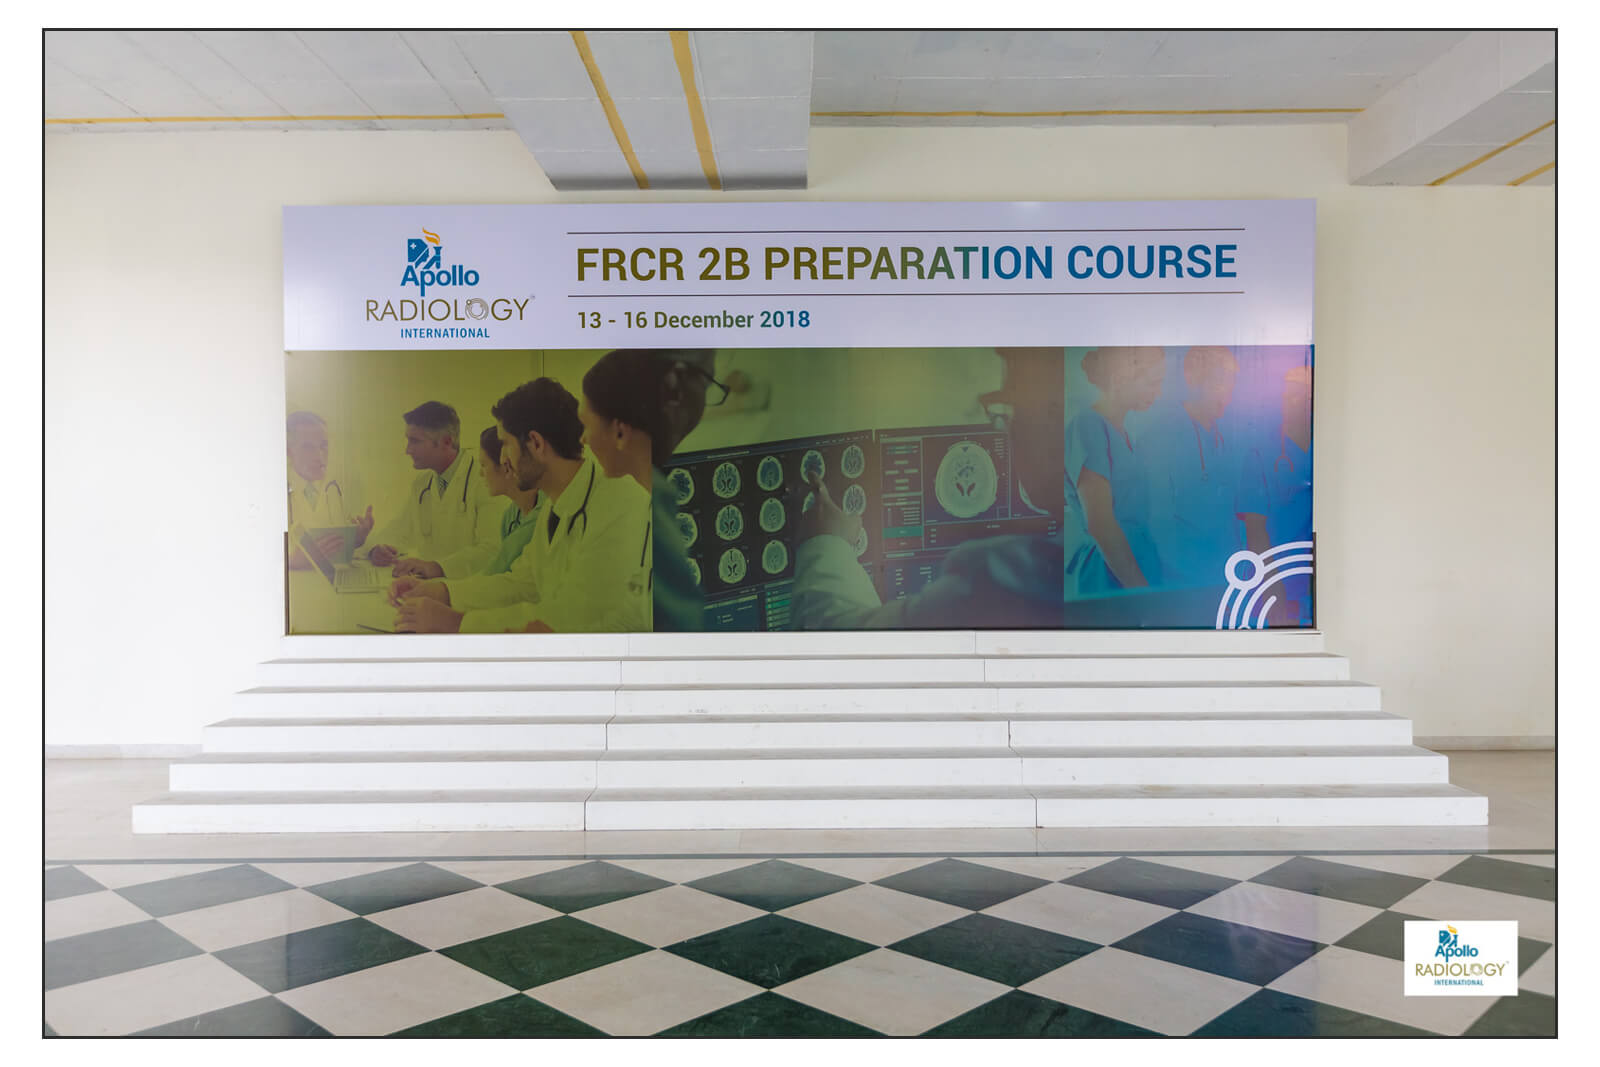 FRCR 2B Preparation Course held by Apollo Radiology International Academy at Apollo Health City in Hyderabad from 13th to 16th December 2018.